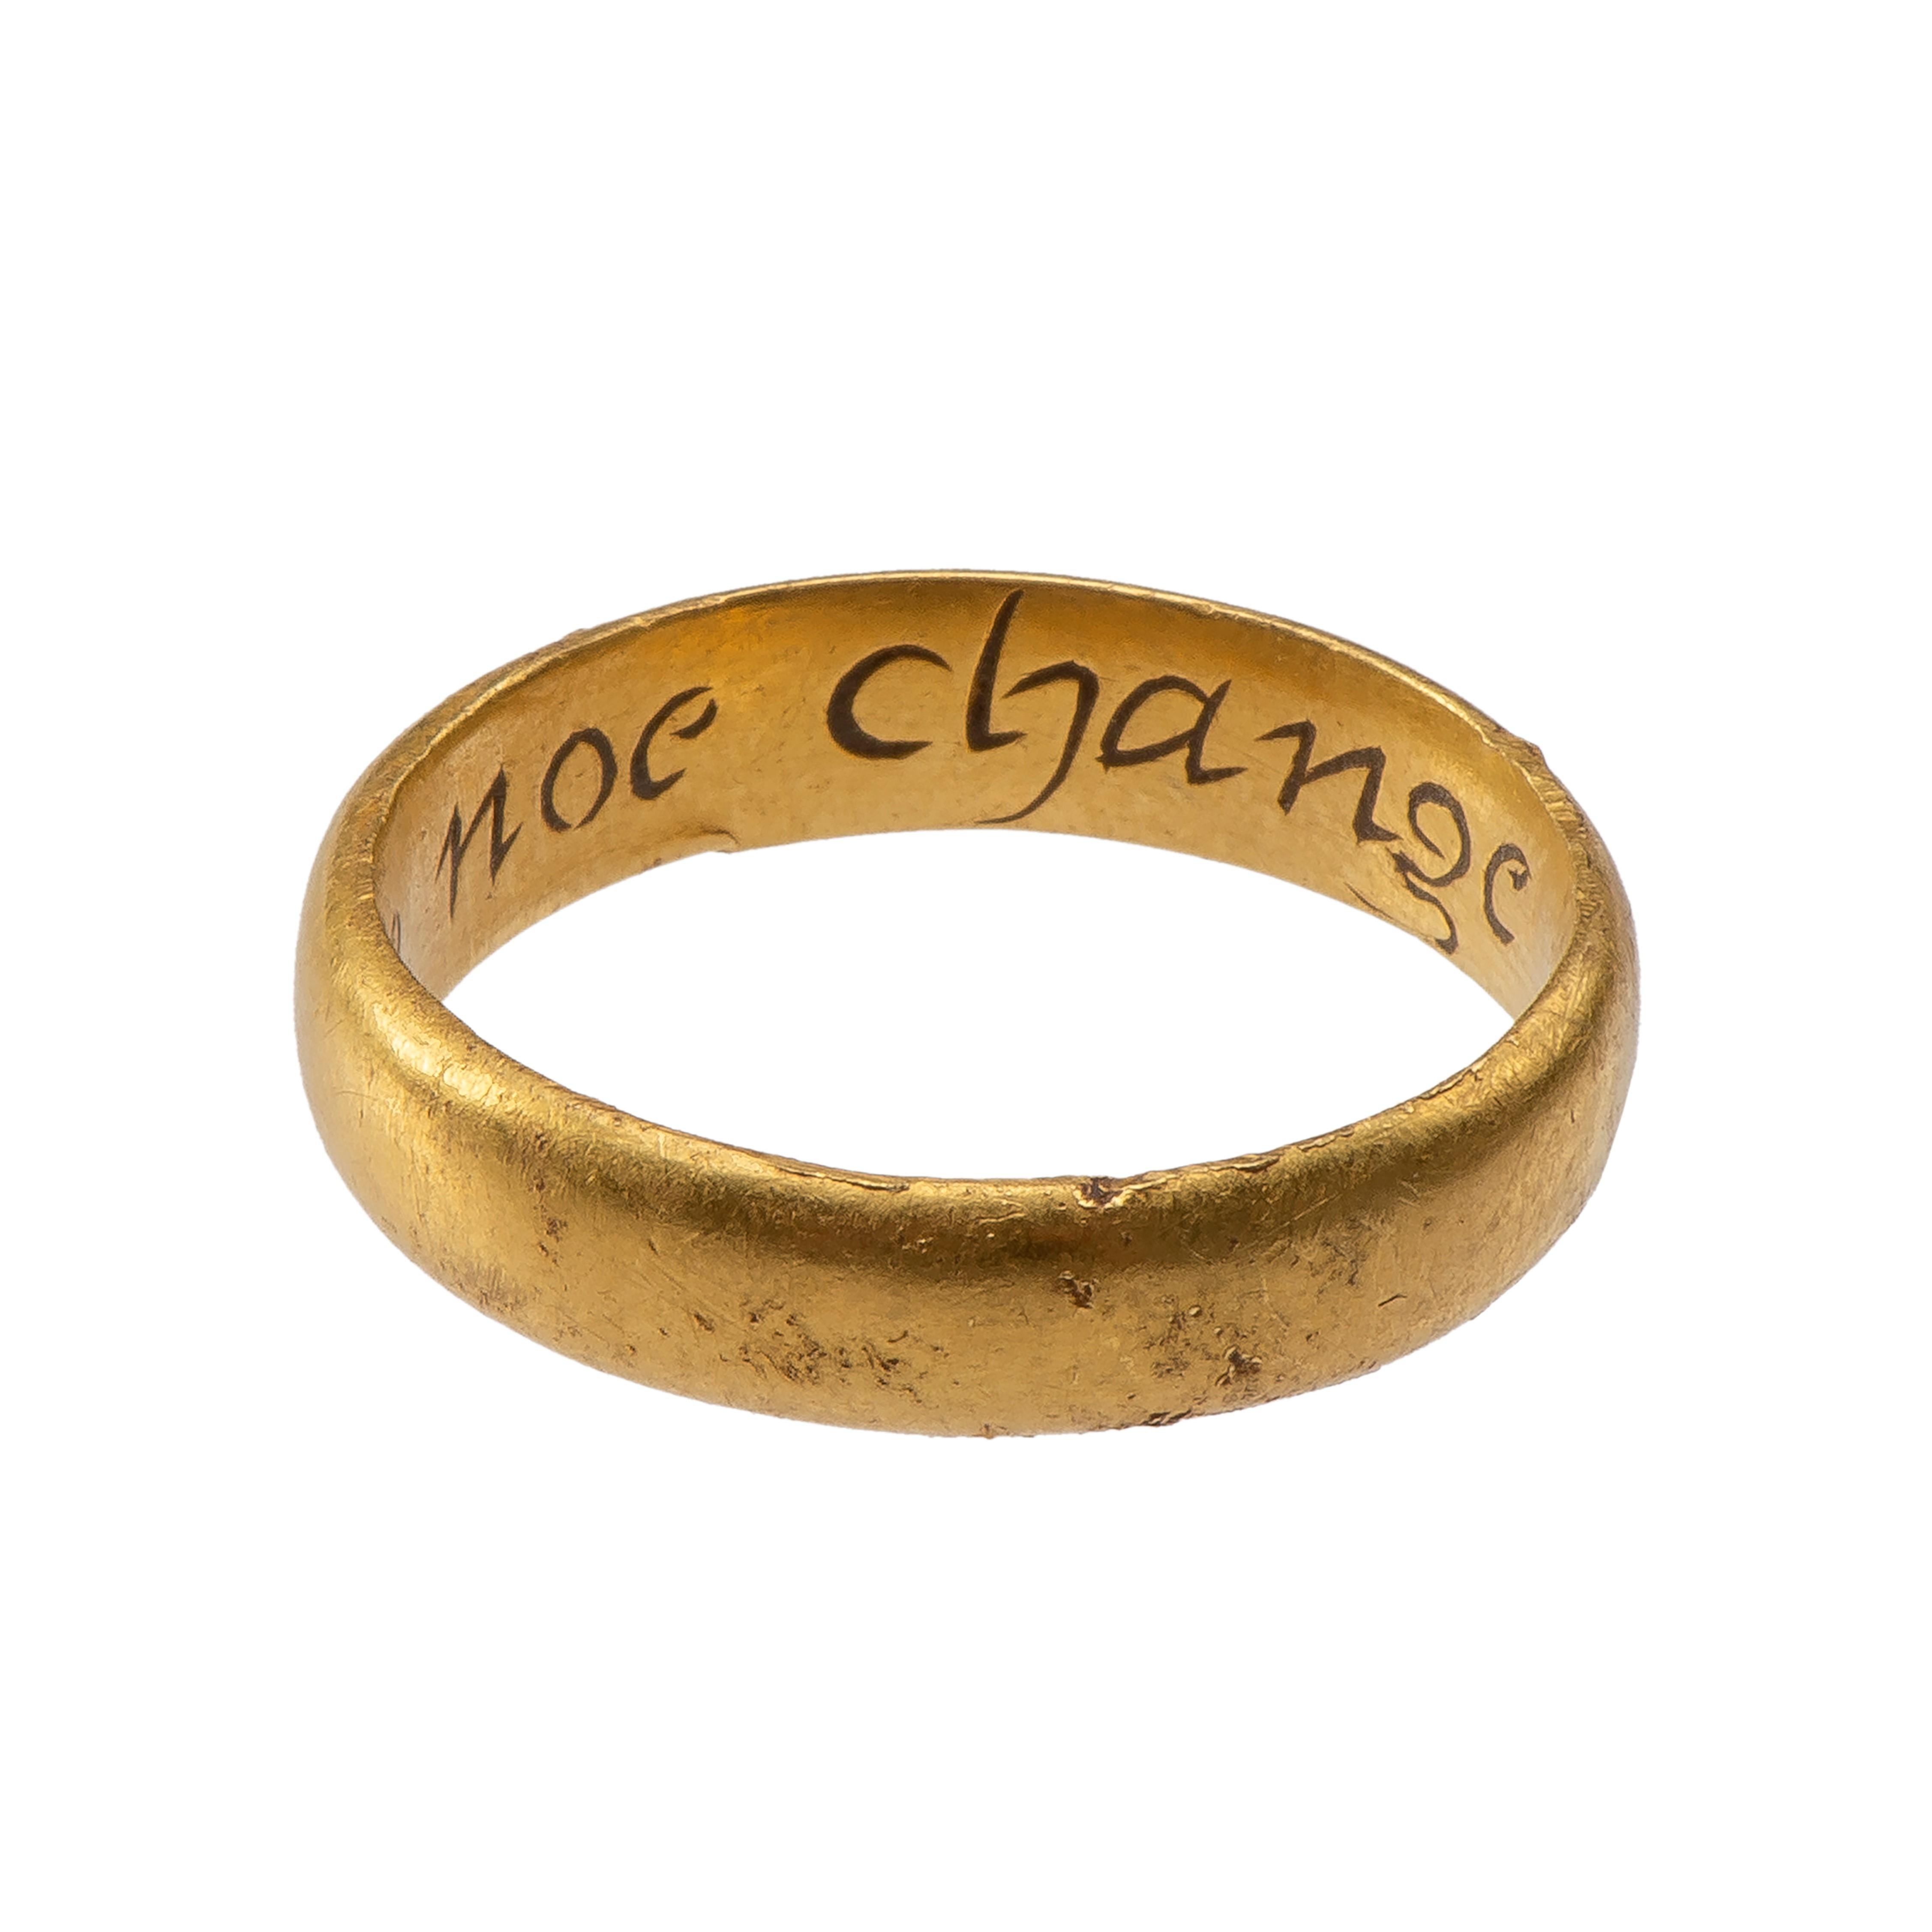 Posy Ring “Till deathe noe change”
England, late 17th-early 18th century
Gold
Weight 5.8 gr; Circumference 56.45 mm; US size 7 3/4; UK size P 1/2

The interior of this posy ring bears the engraved inscription “Till deathe noe change” in italic